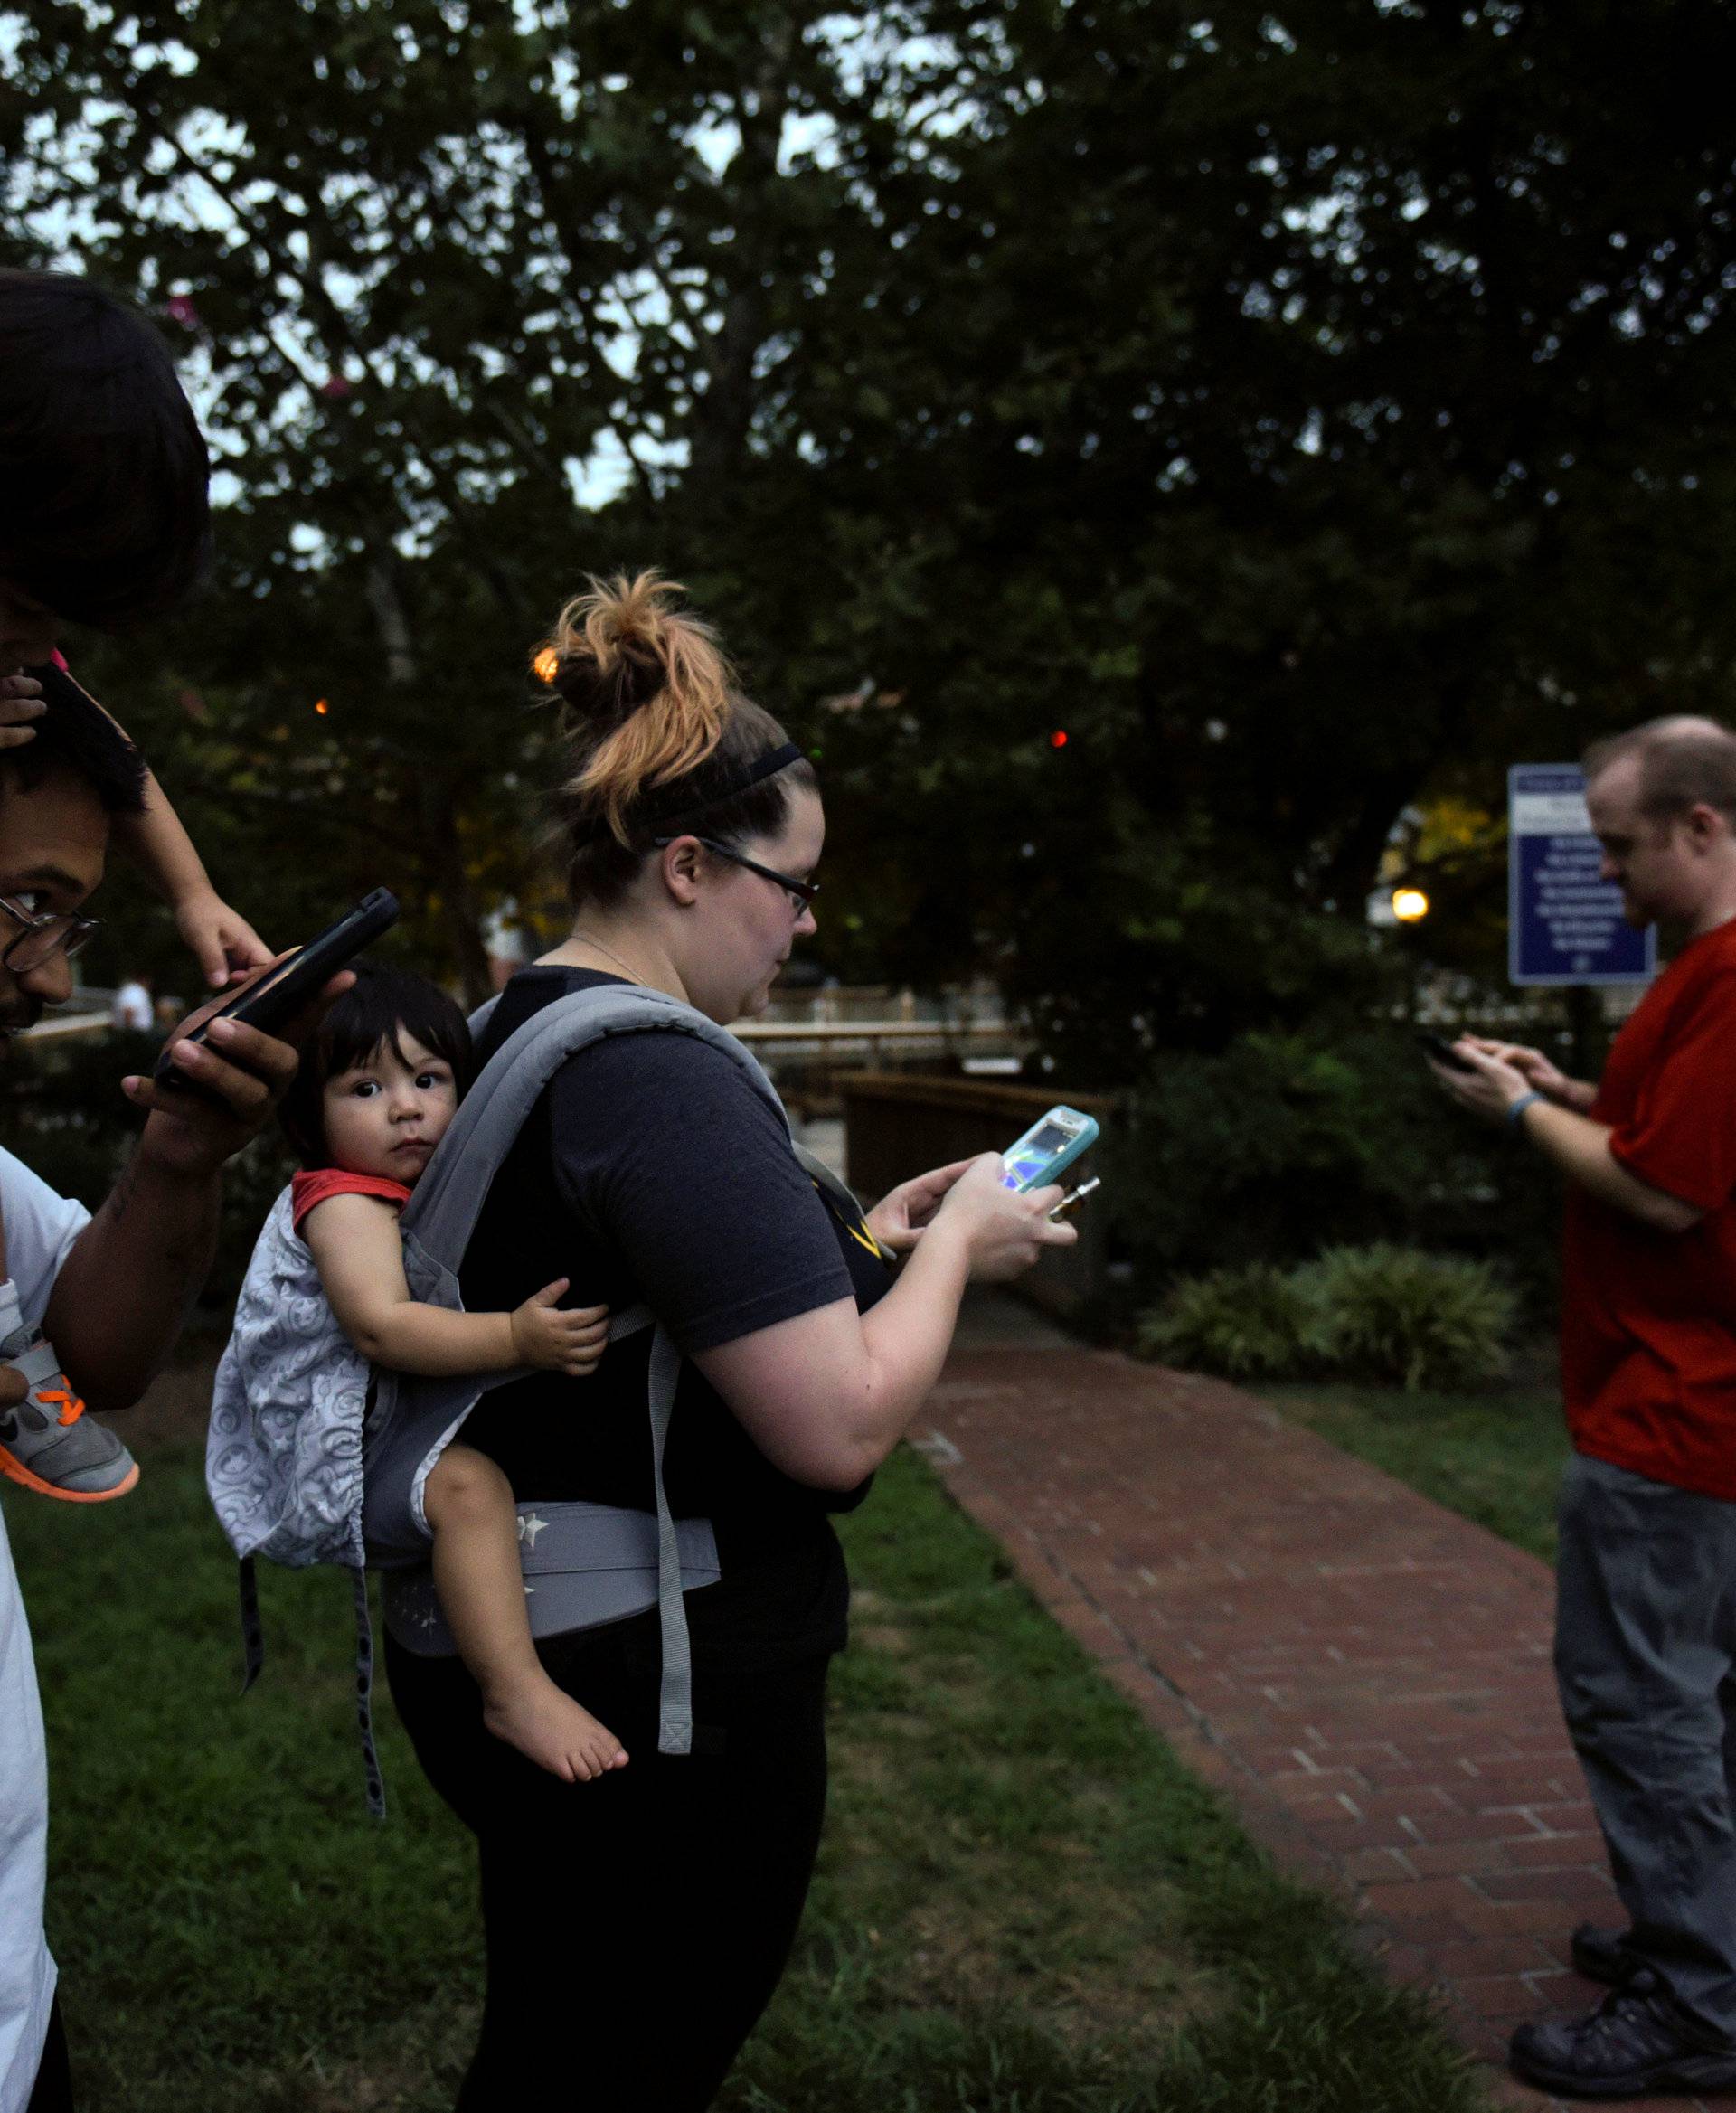 People play "Pokemon GO" in the small town of Occoquan